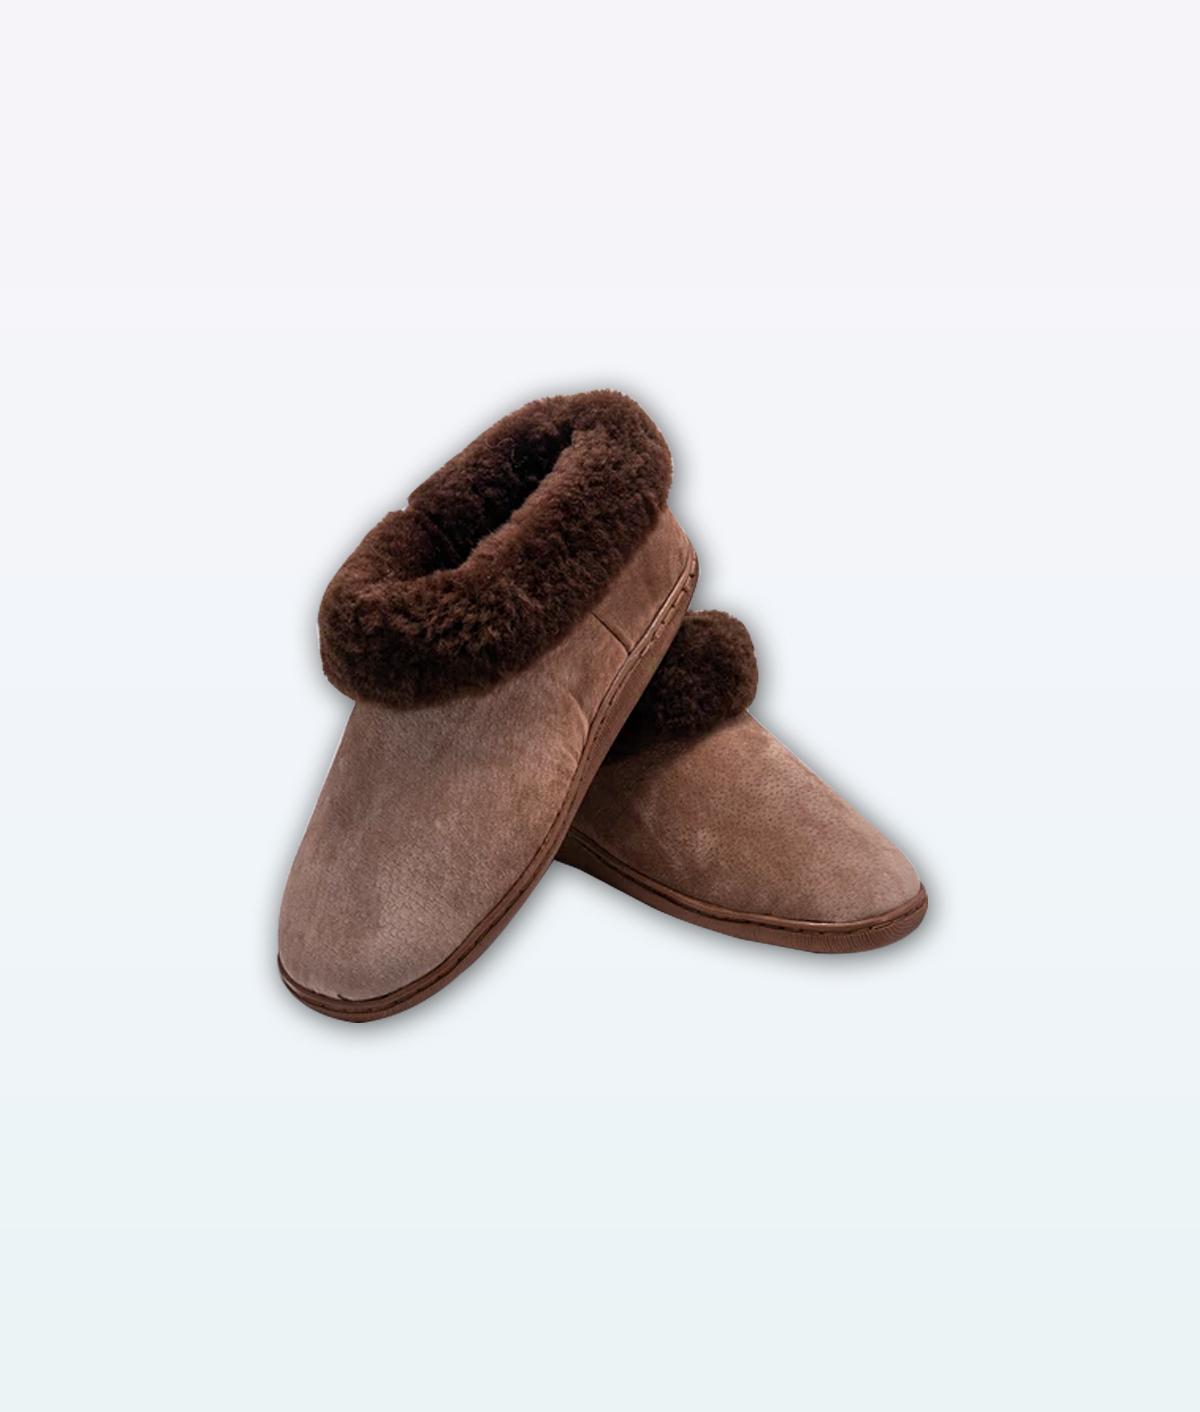 camel-wool-house-boots